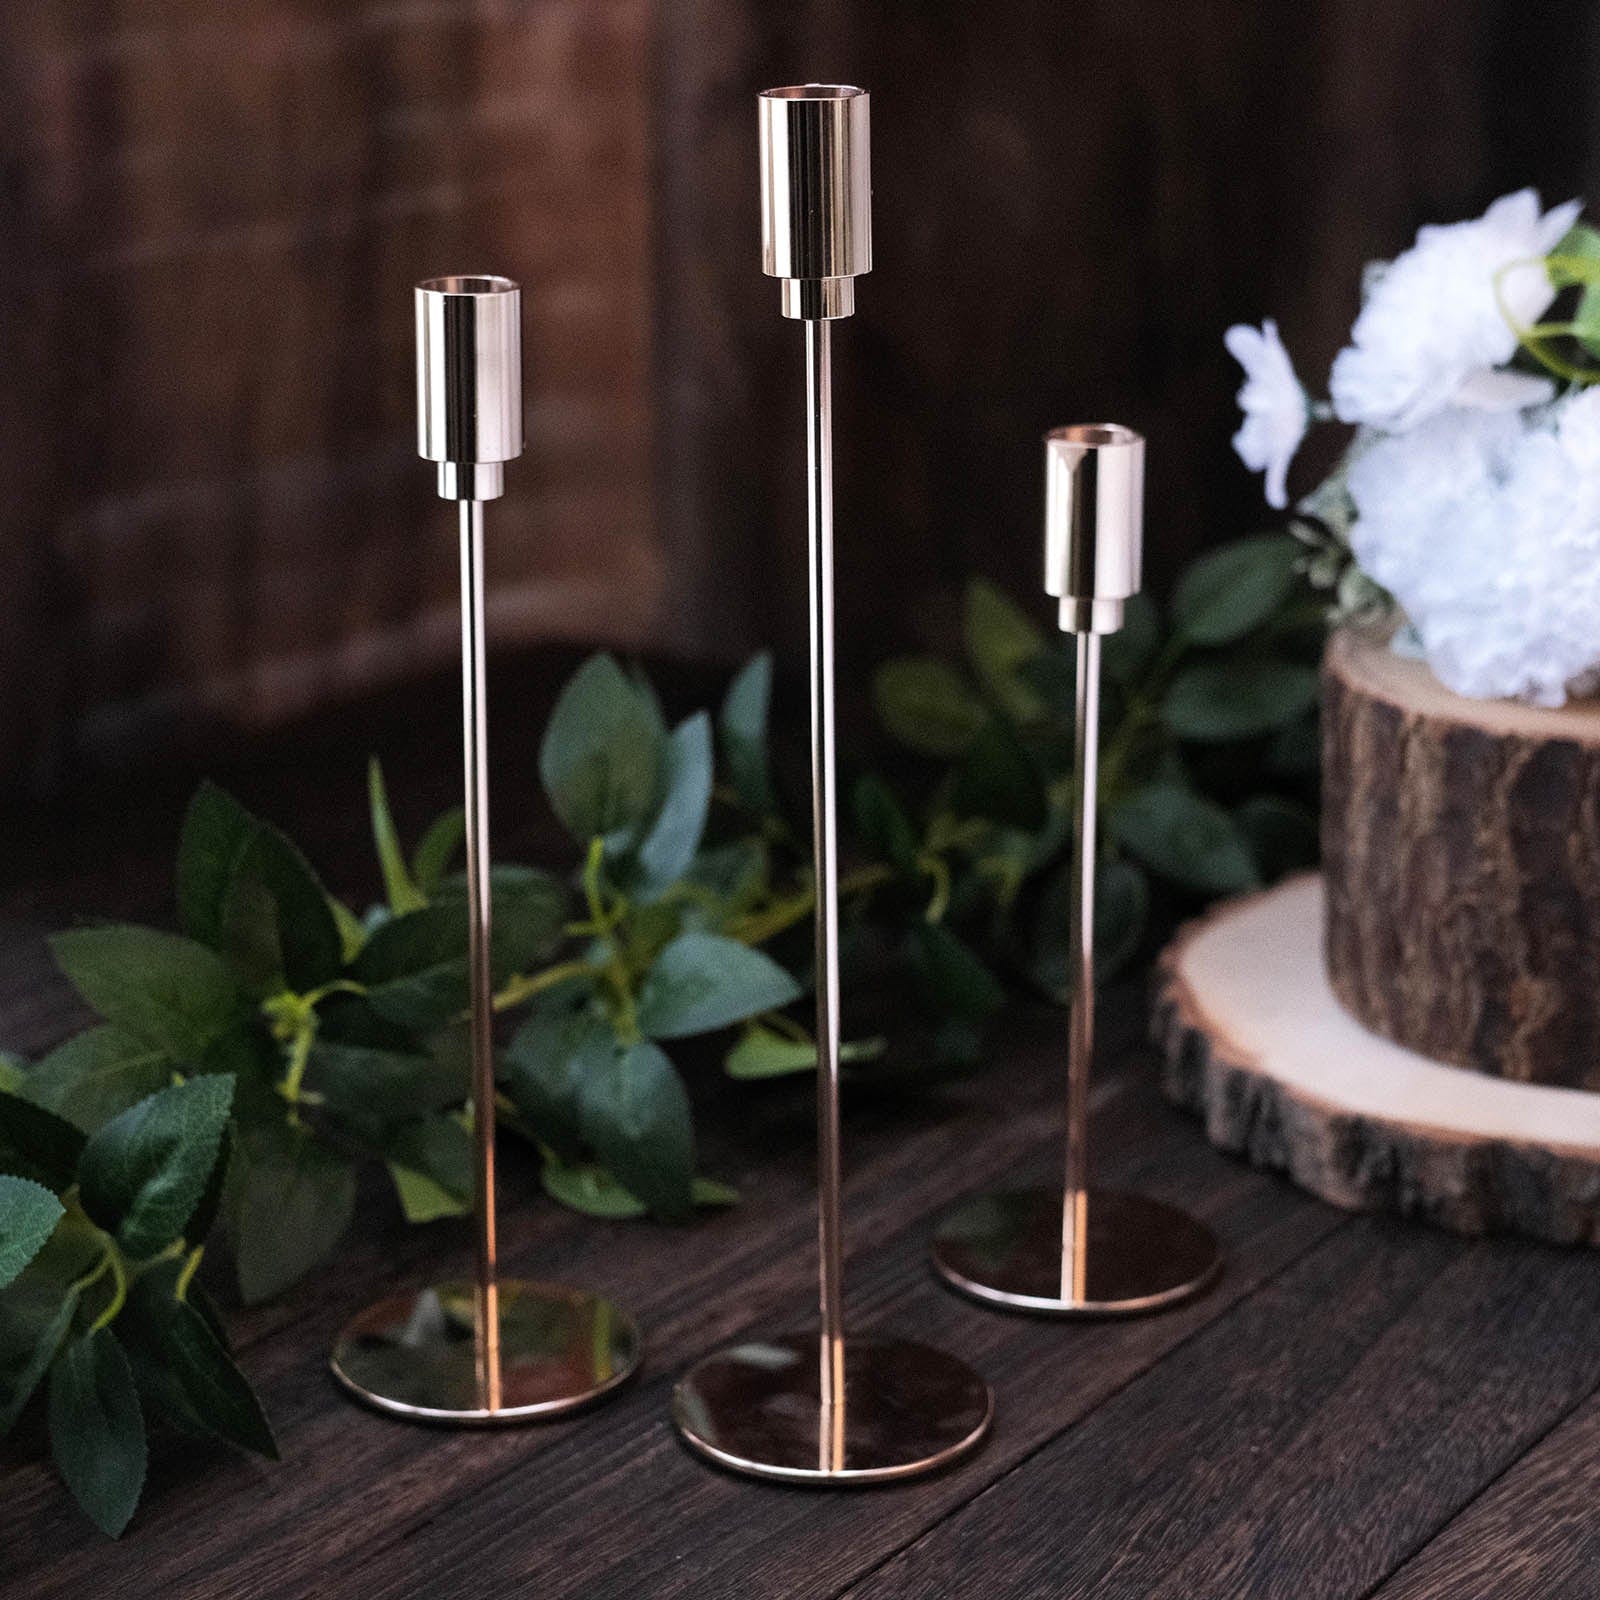 3 Metal Taper Candle Stands with Round Solid Base - Gold IRON_CAND_TP016_GOLD